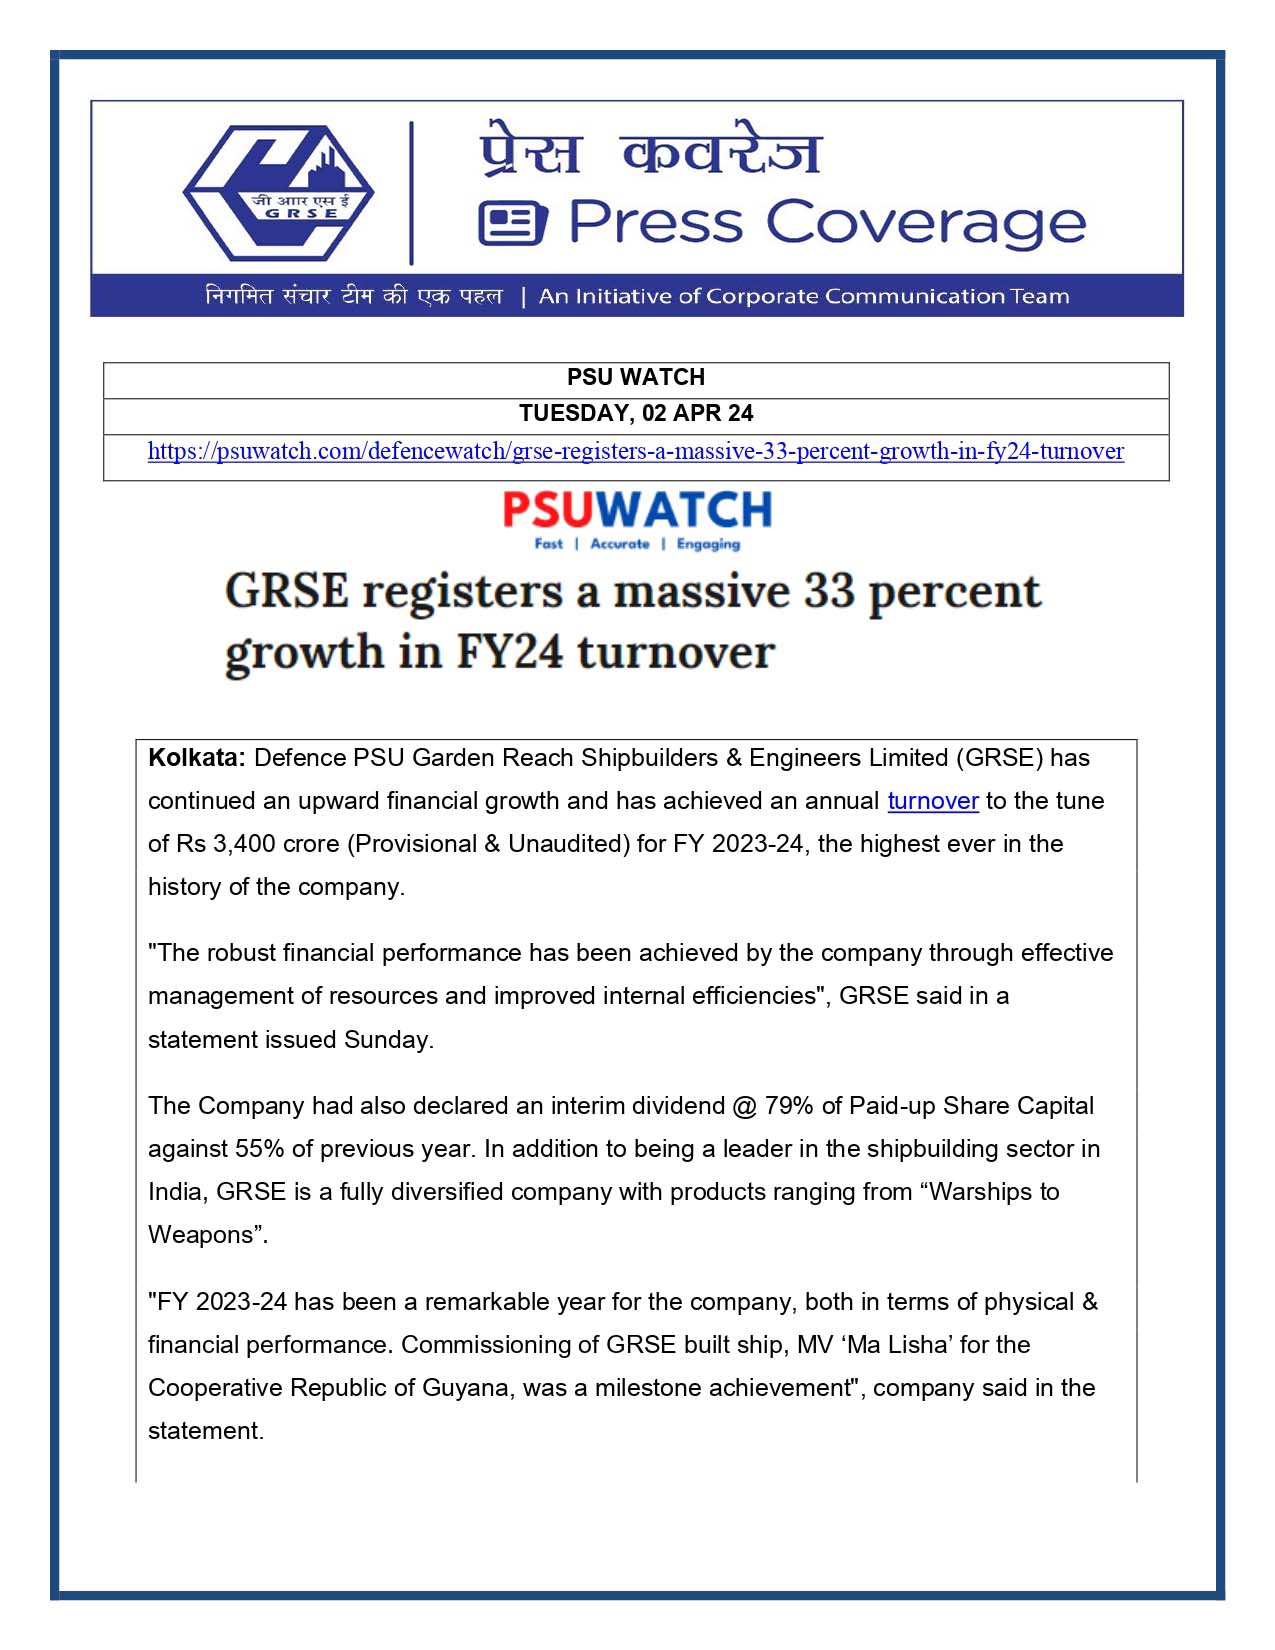 Press Coverage : PSU Watch, 02 Apr 24 : GRSE registers a massive 33 percent growth in FY24 turnover